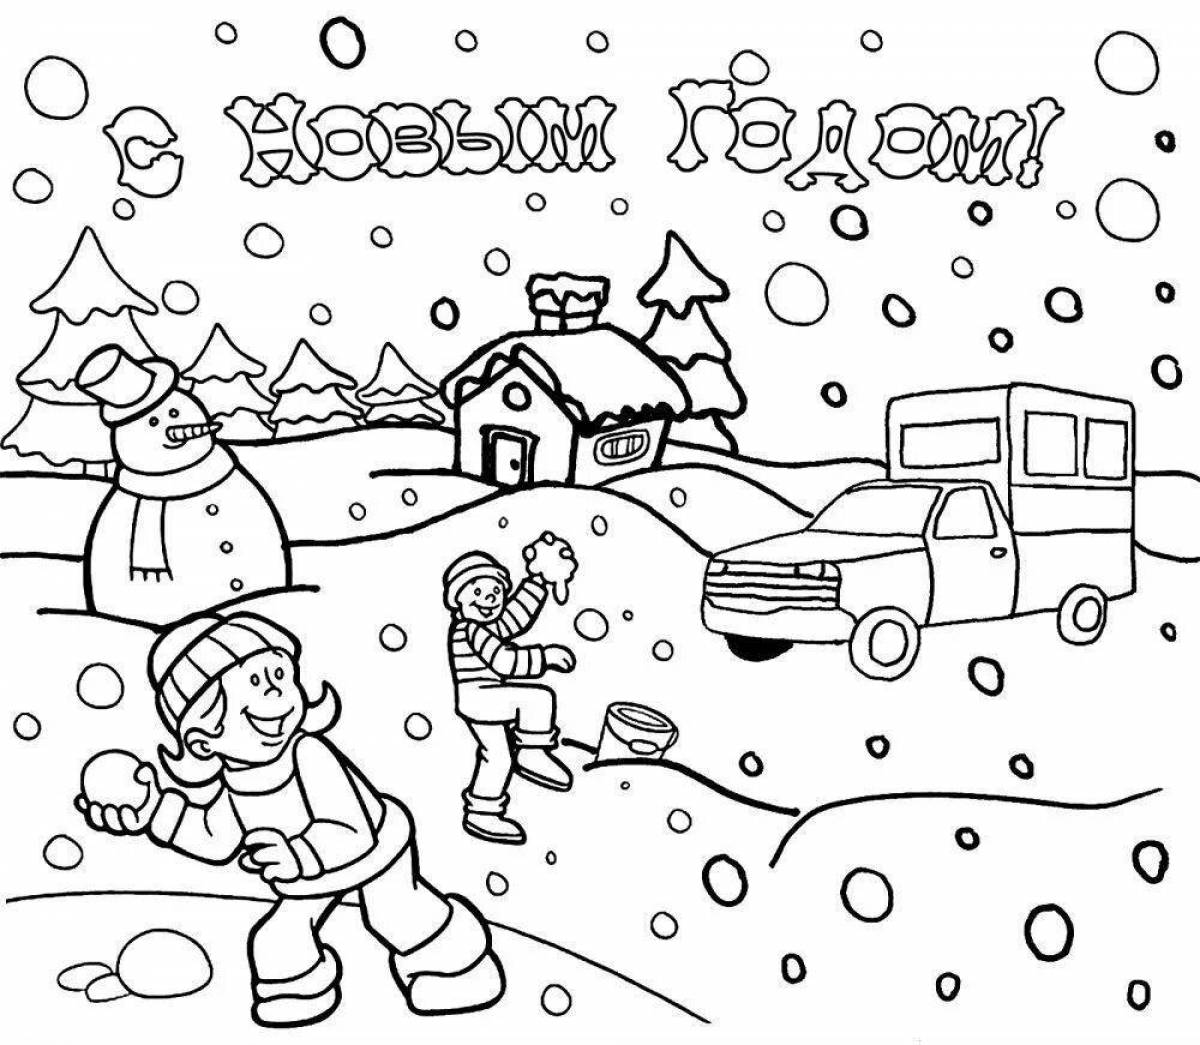 Gorgeous Christmas car coloring page